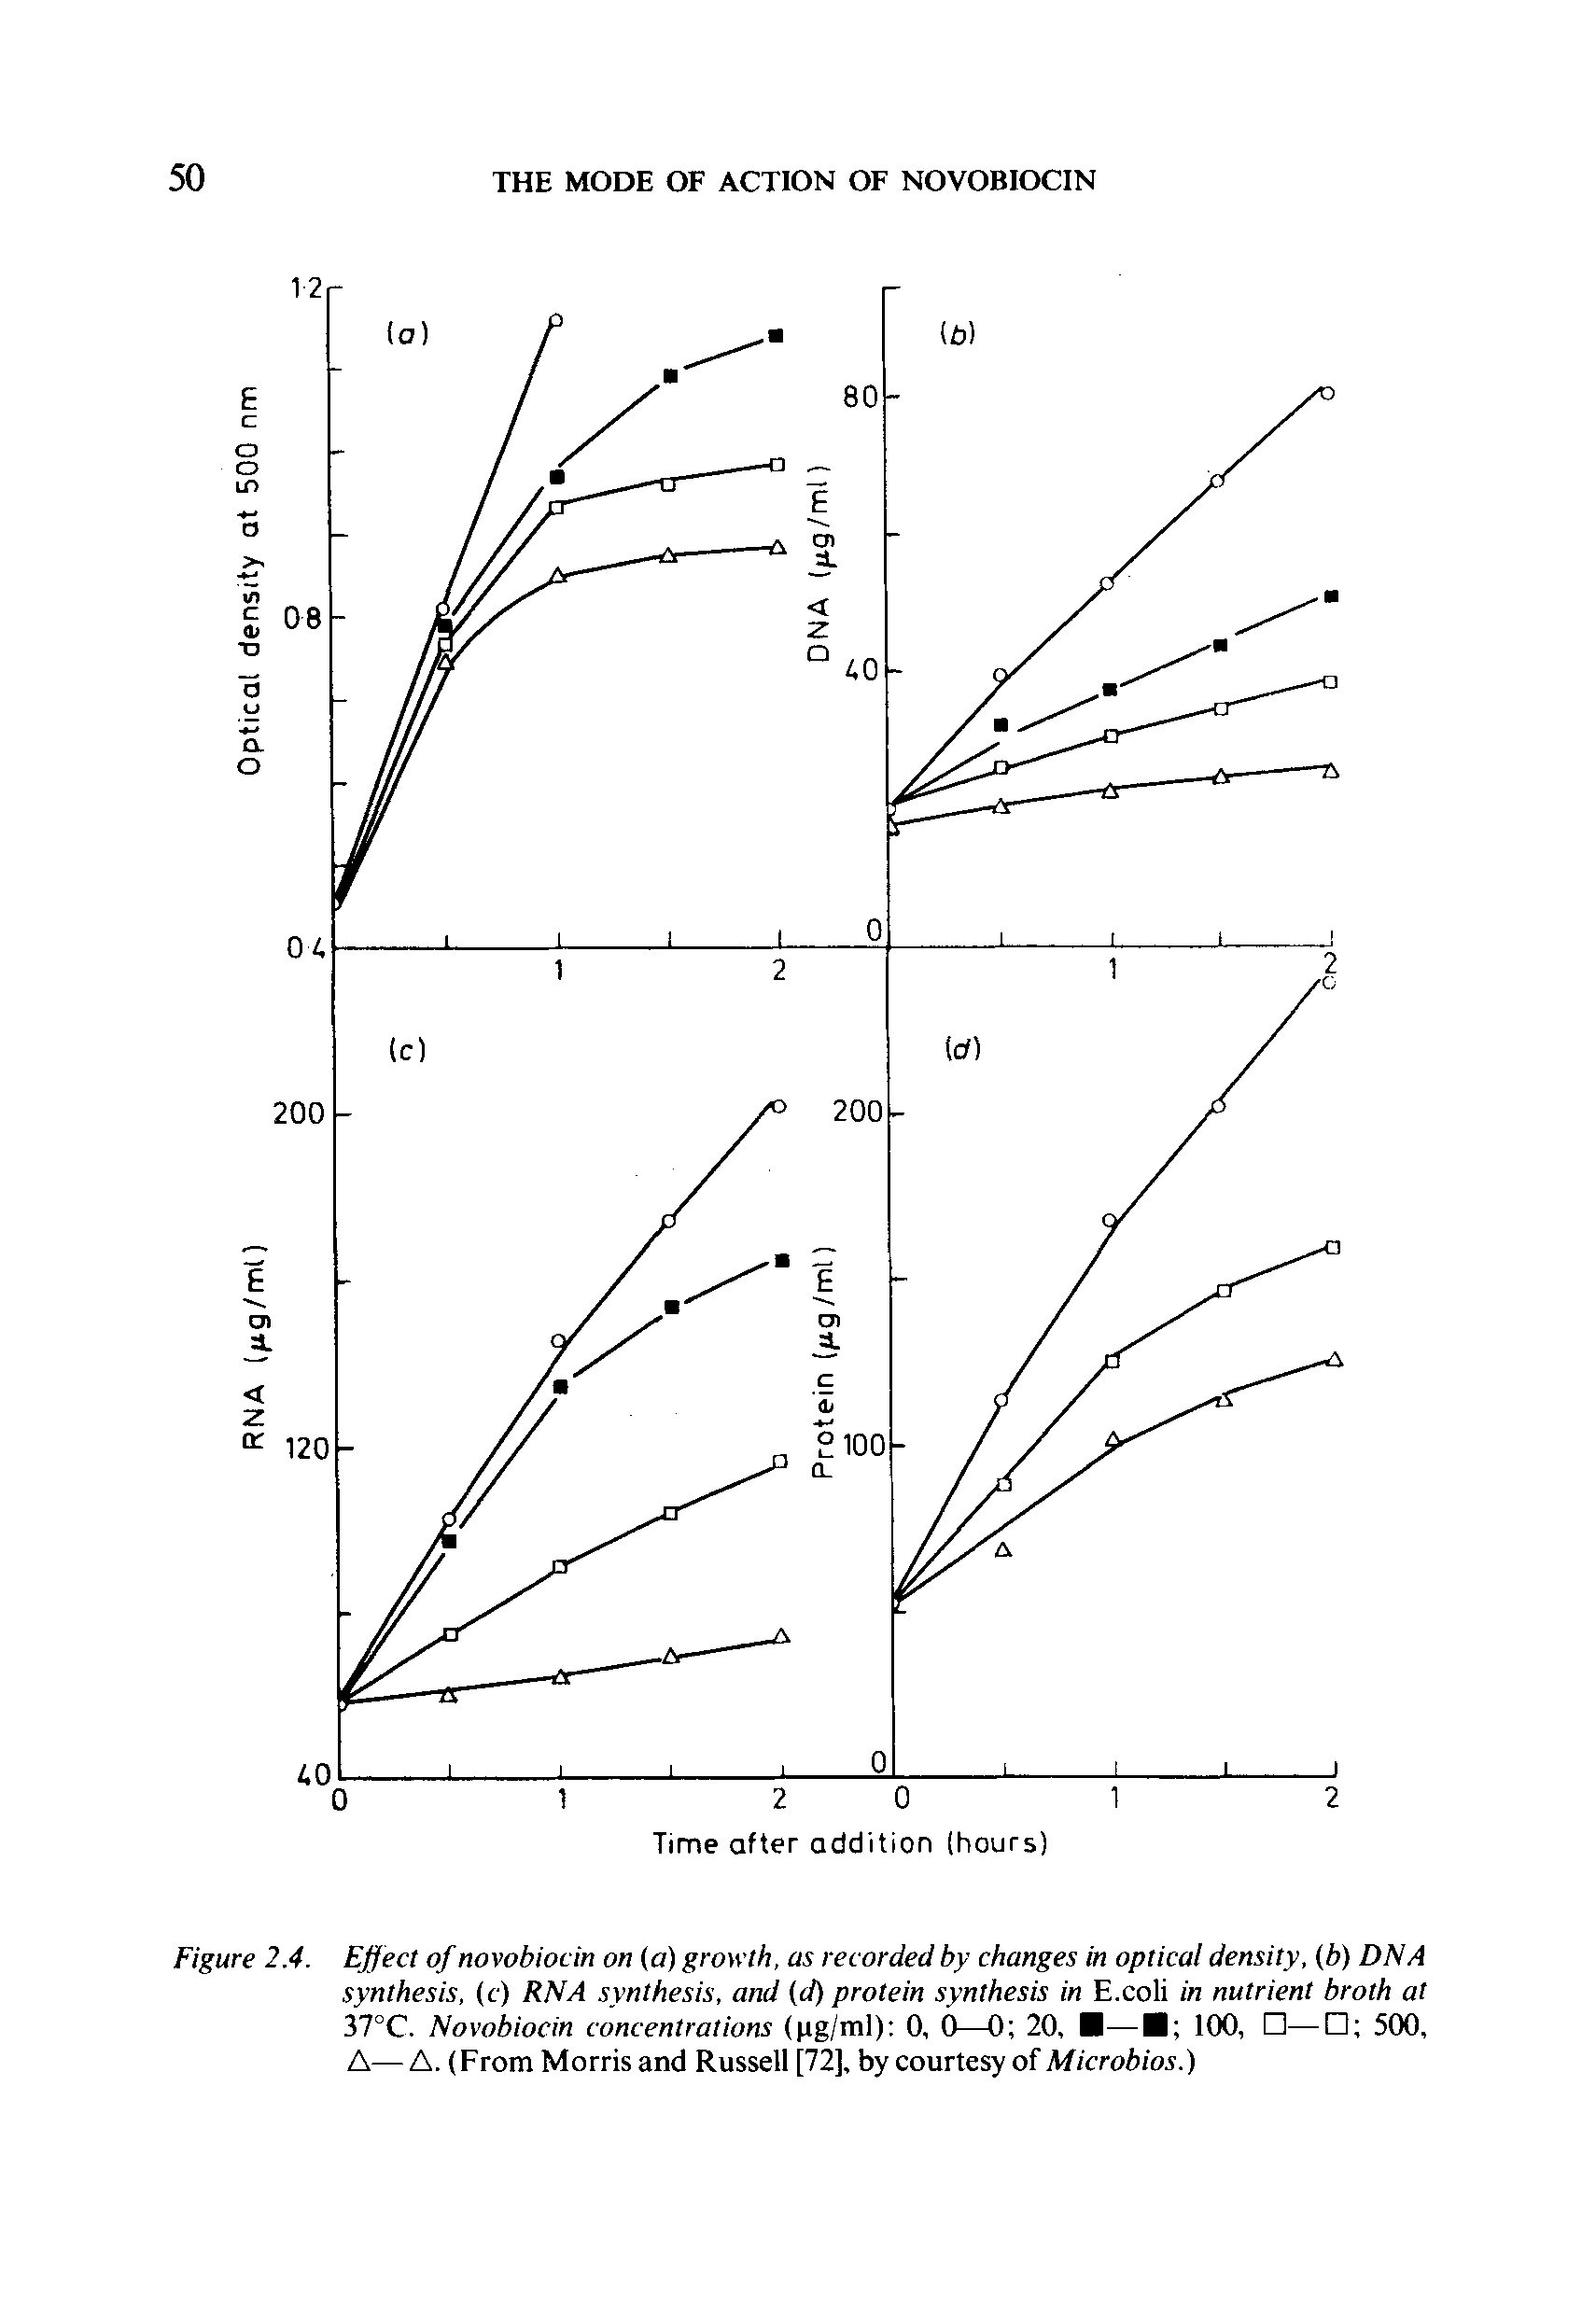 Figure 2.4. Effect of novobiocin on (a) growth, as recorded by changes in optical density, (b) DNA synthesis, (c) RNA synthesis, and (d) protein synthesis in E.coli in nutrient broth at 37°C. Novobiocin concentrations (ng/ml) 0, 0—0 20, — 100, — 500, A—A. (From Morris and Russell [72], by courtesy of Microbios.)...